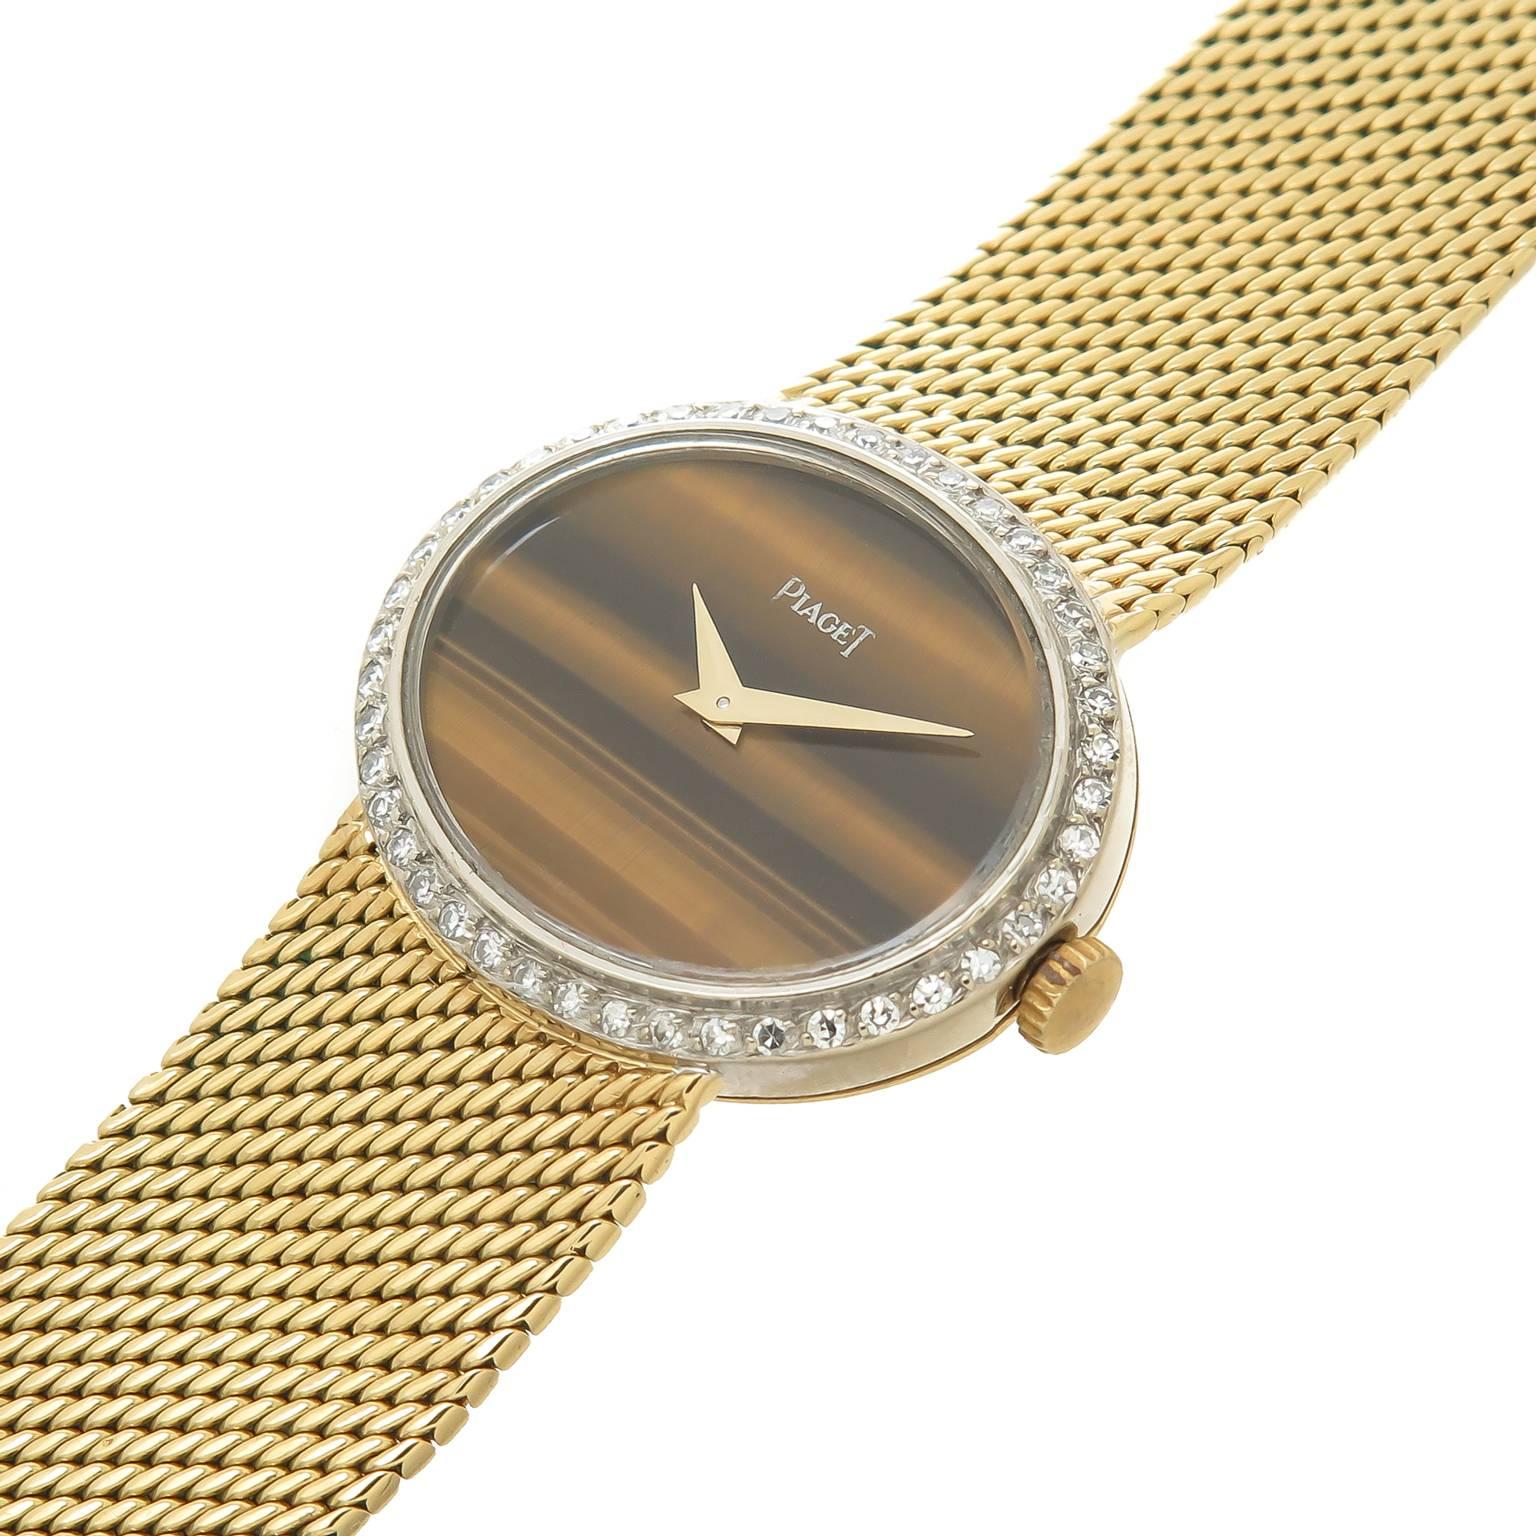 Circa 1980 Piaget Ladies Wrist Watch,  26 X 22 MM Case with Factory Diamond Bezel of approximately 1 Carat. 17 Jewel Manual wind Mechanical movement, Tiger Eye Dial with Gold Hands. 5/8 inch wide Soft mesh link Piaget bracelet with Piaget logo on